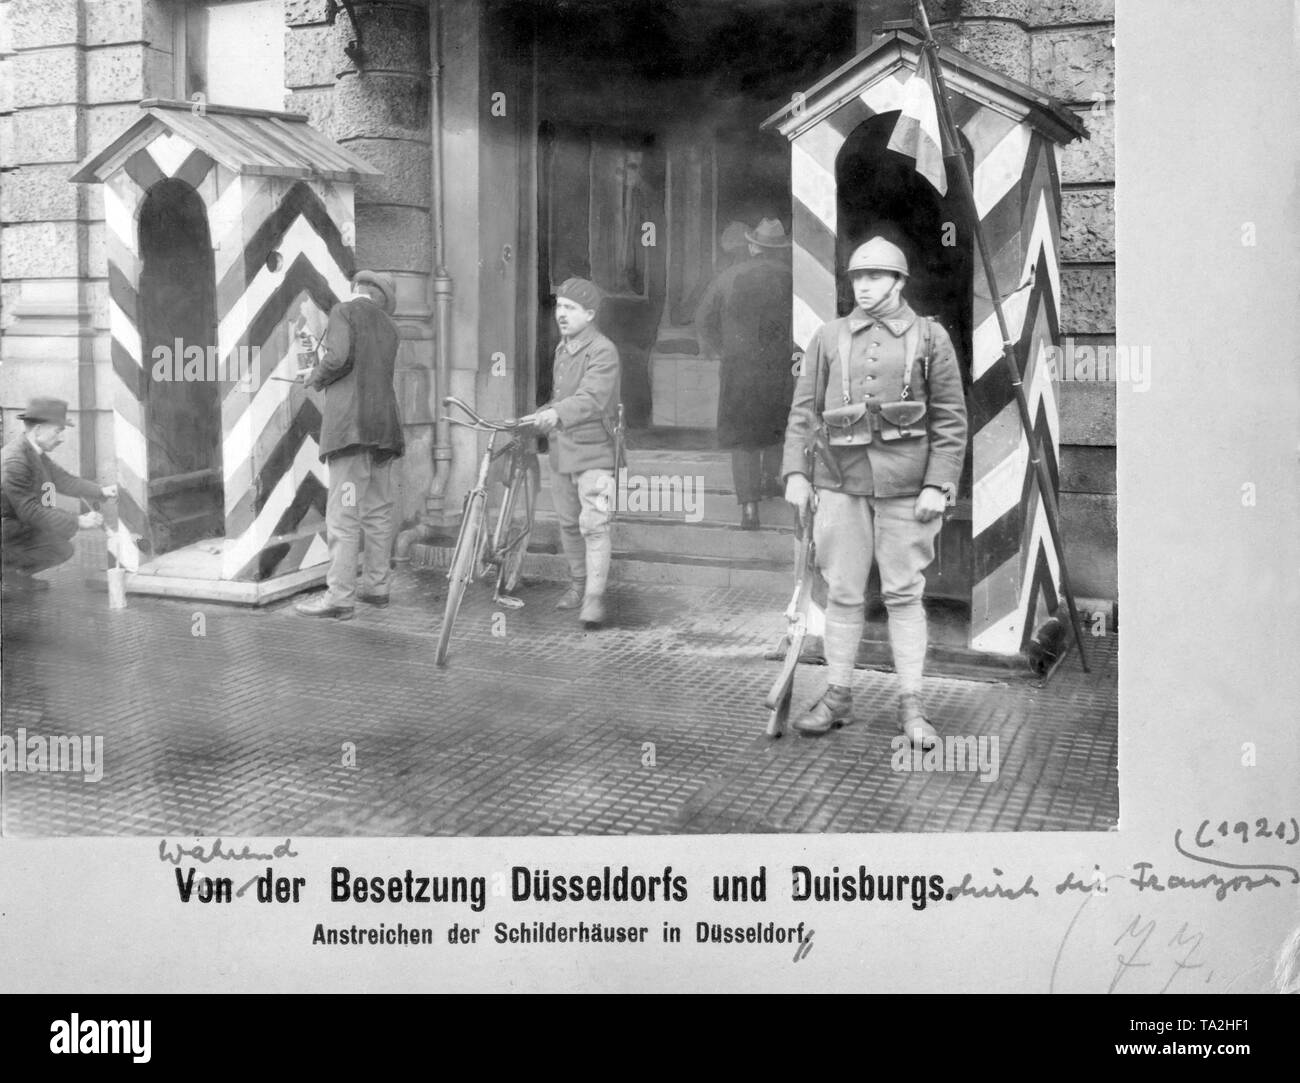 After the German payment of reparations had been delayed, French soldiers occupied Duisburg and Duesseldorf. In order to make their authority visible, guard houses were set up in many places. Two such sentry boxes are being painted here. Stock Photo